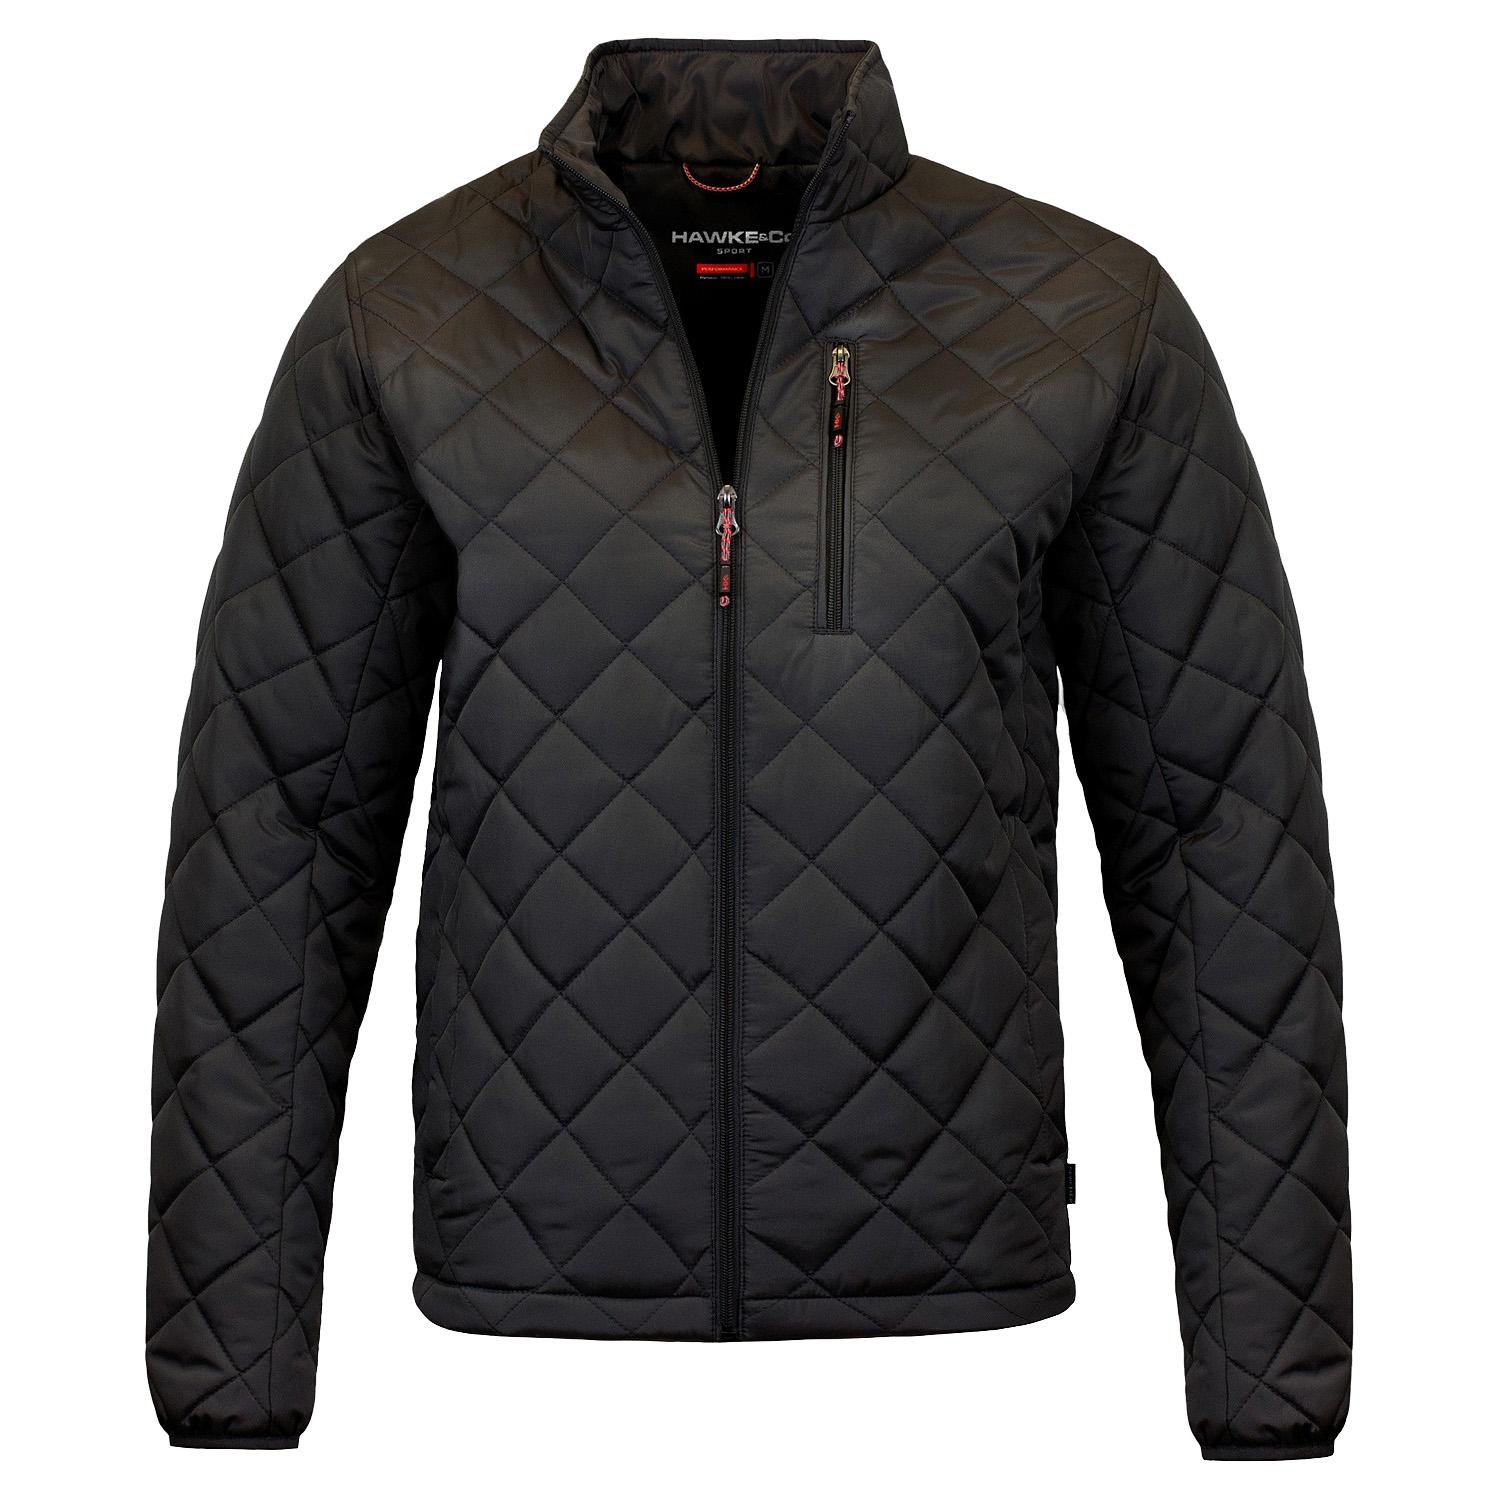 Hawke and Co Mens Diamond Quilted Jacket for $29.99 Shipped